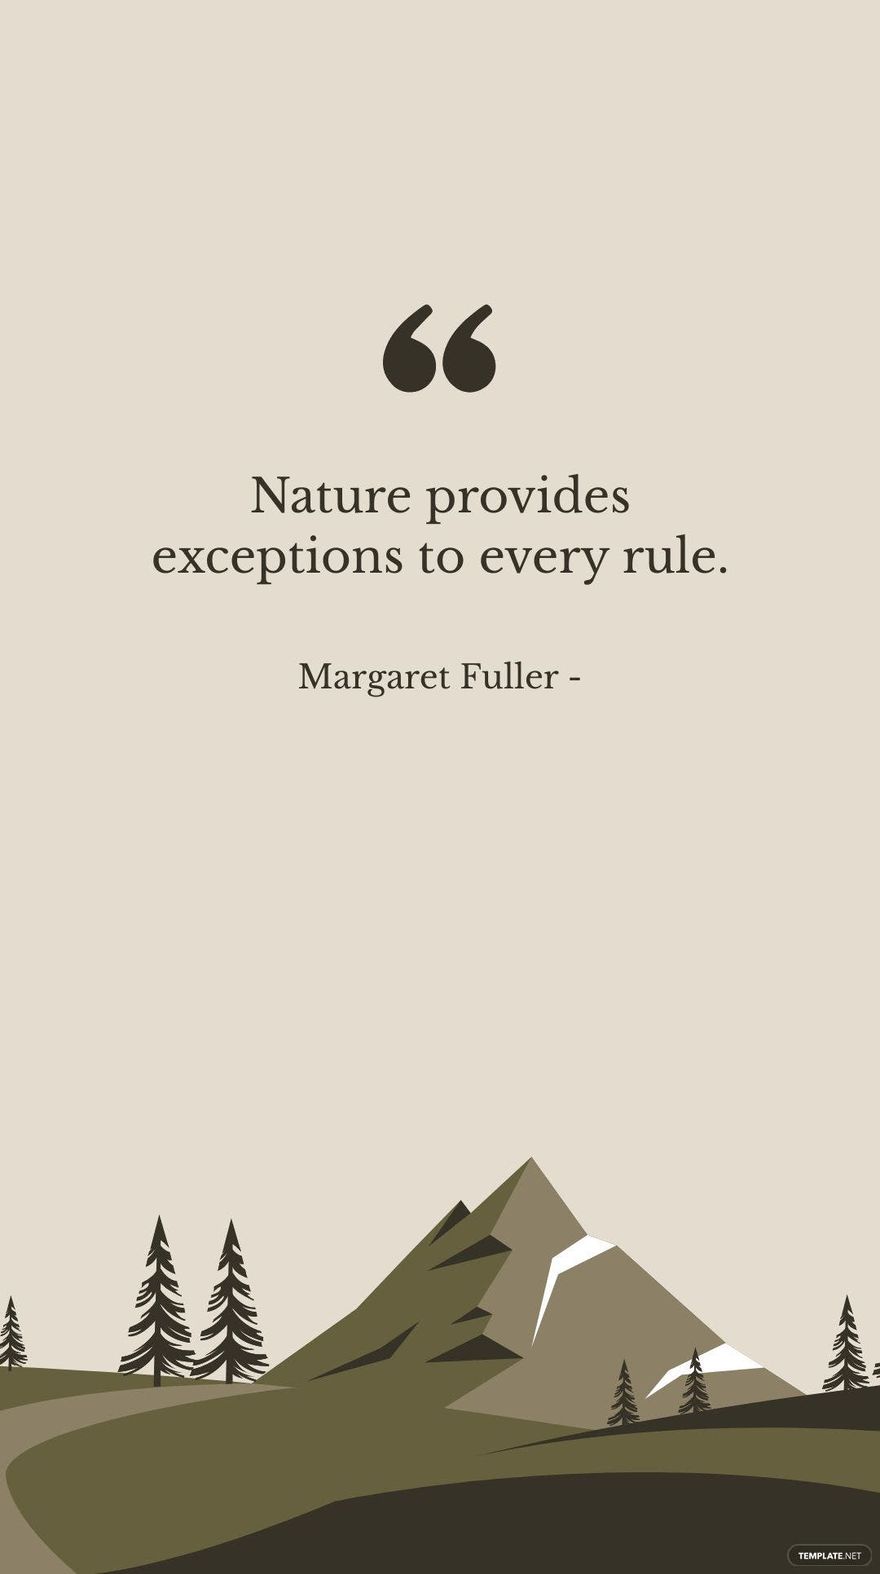 Margaret Fuller - Nature provides exceptions to every rule. 